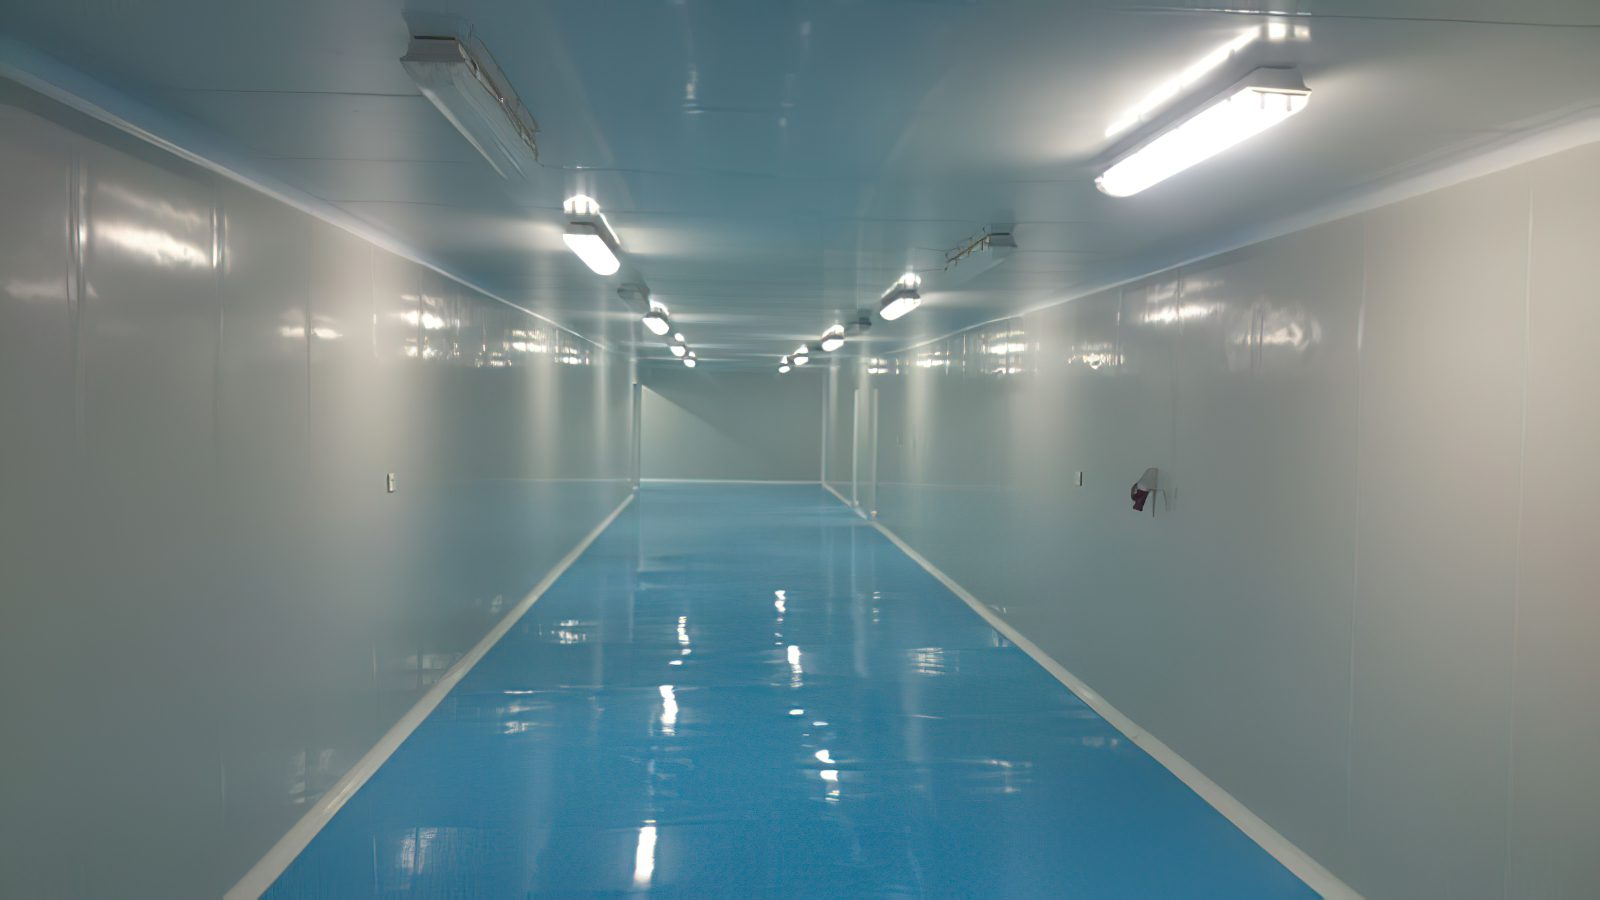 WhatsApp Image 2020 12 28 at 11.26.51 AM gigapixel scale - FLOOR IN - Industrial Epoxy Company